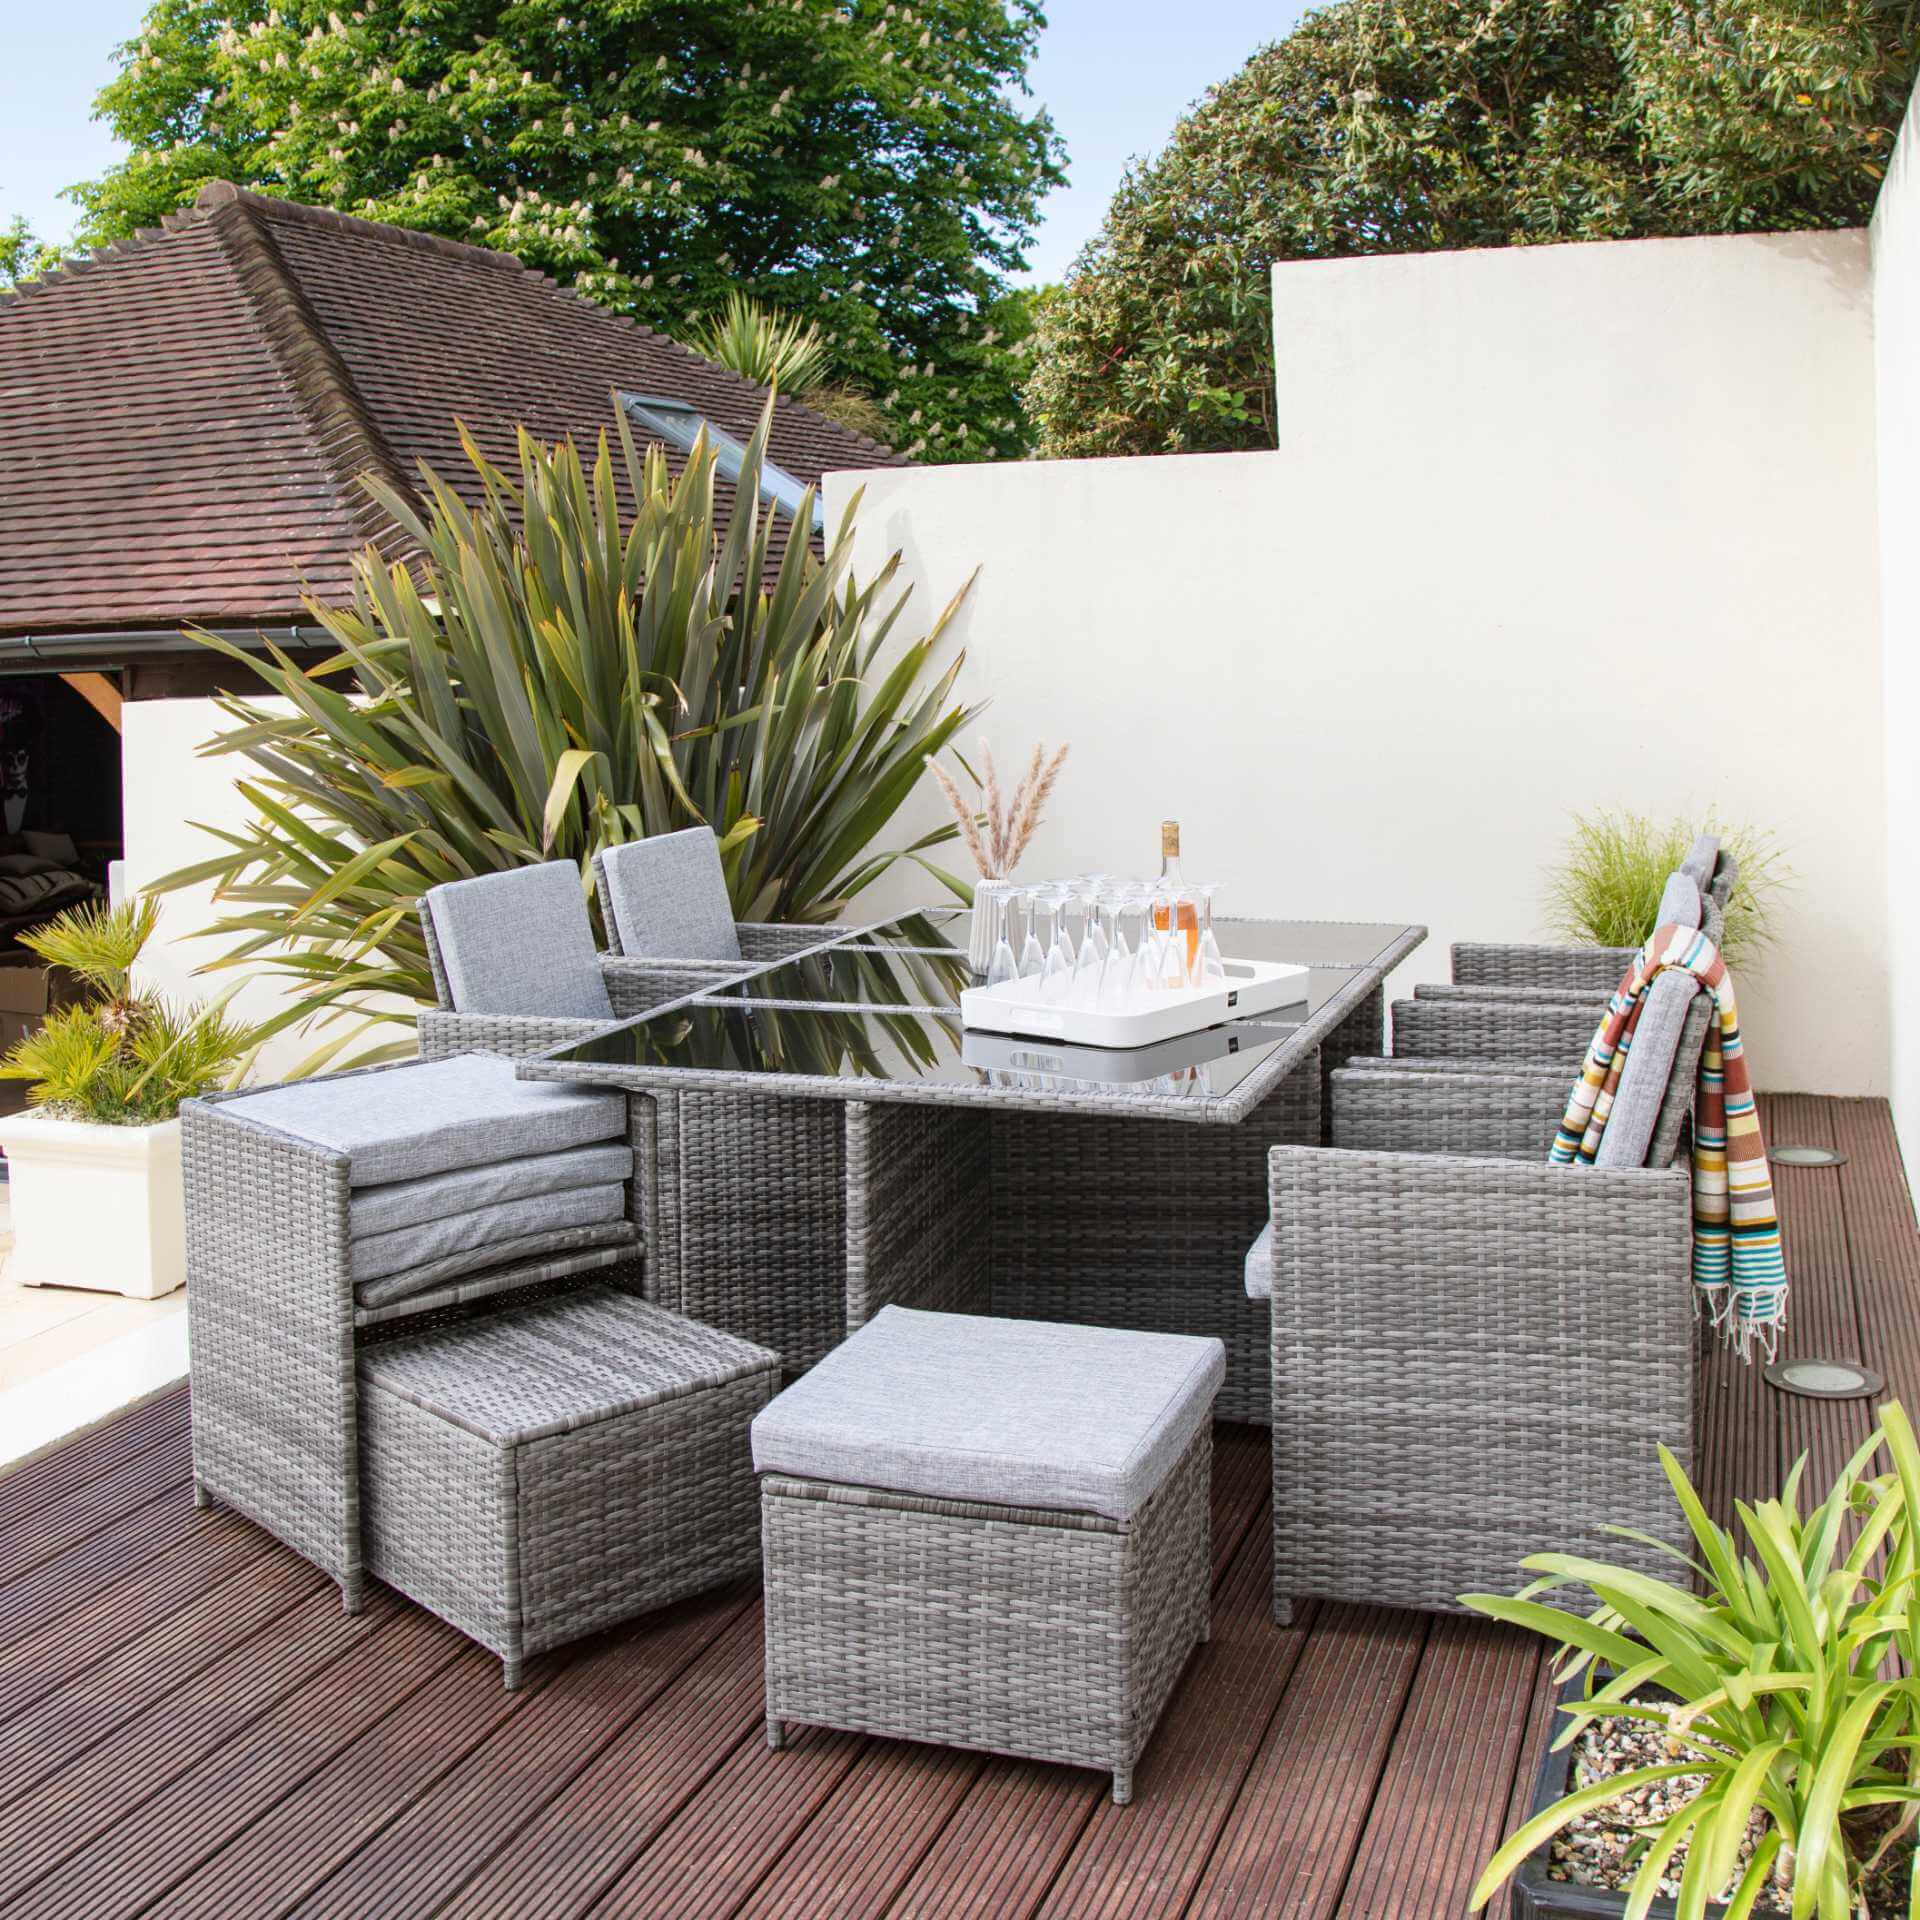 10 Seater Rattan Cube Outdoor Dining Set with Parasol - Grey Weave - Laura James